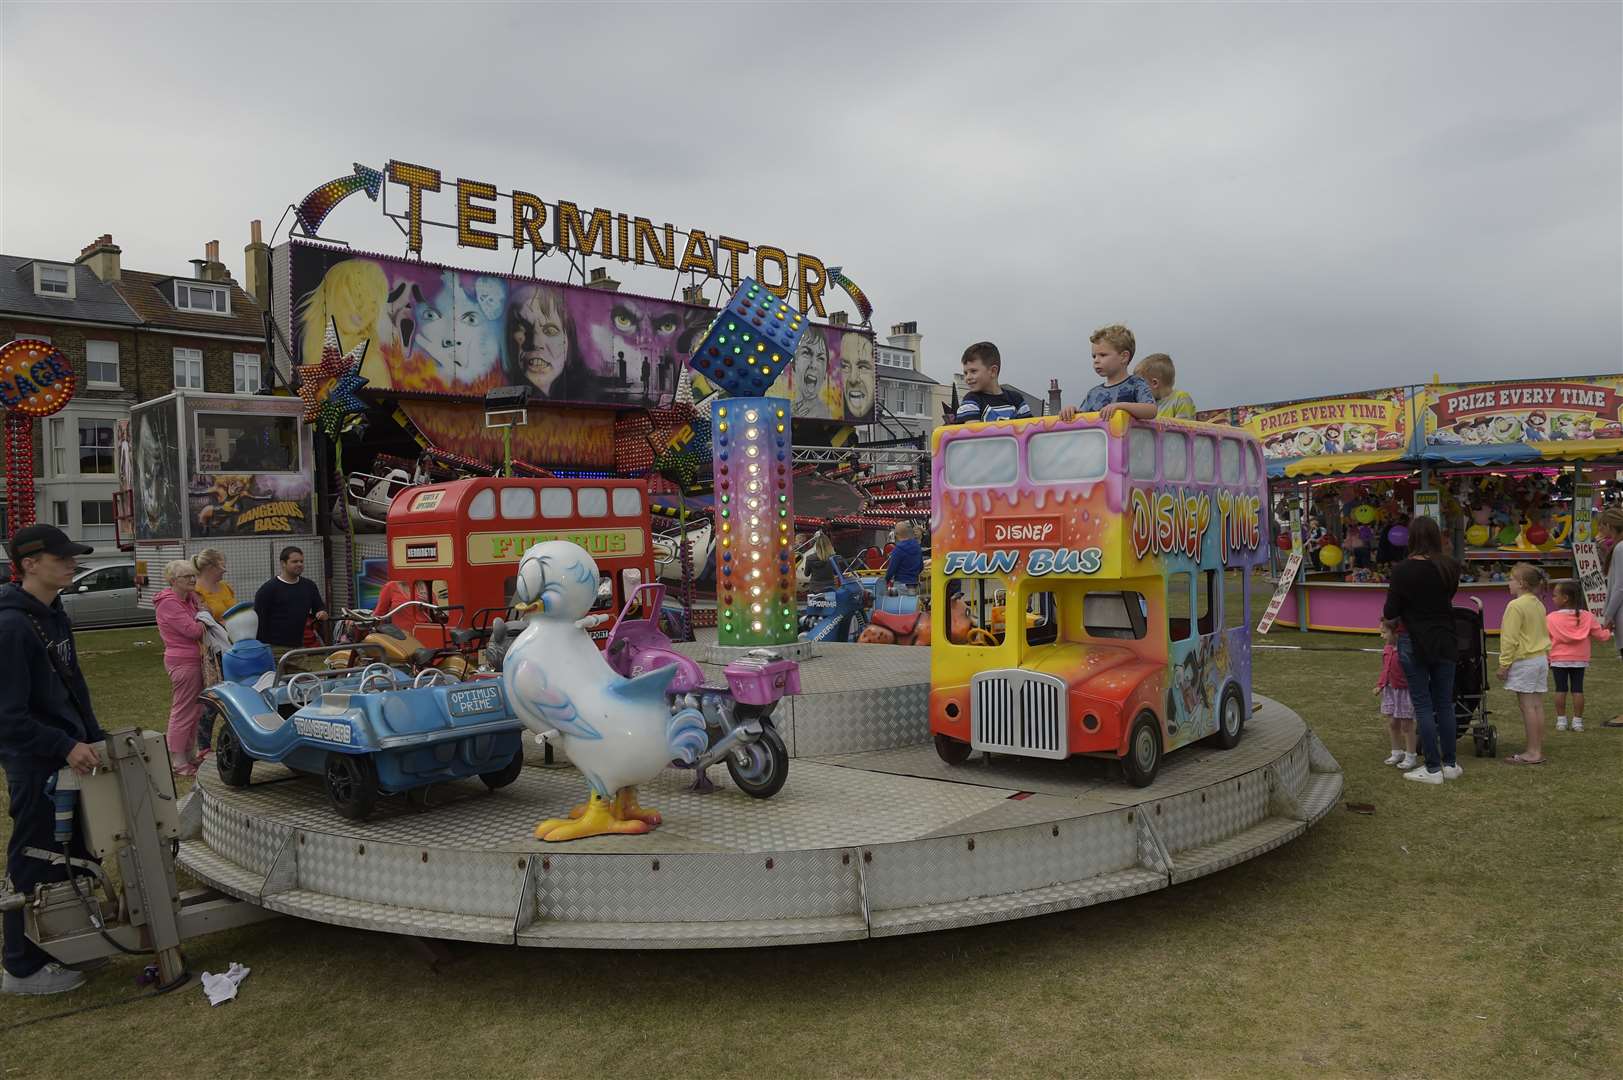 Maria Forrest says the people of Deal are fantastic and always support her funfair